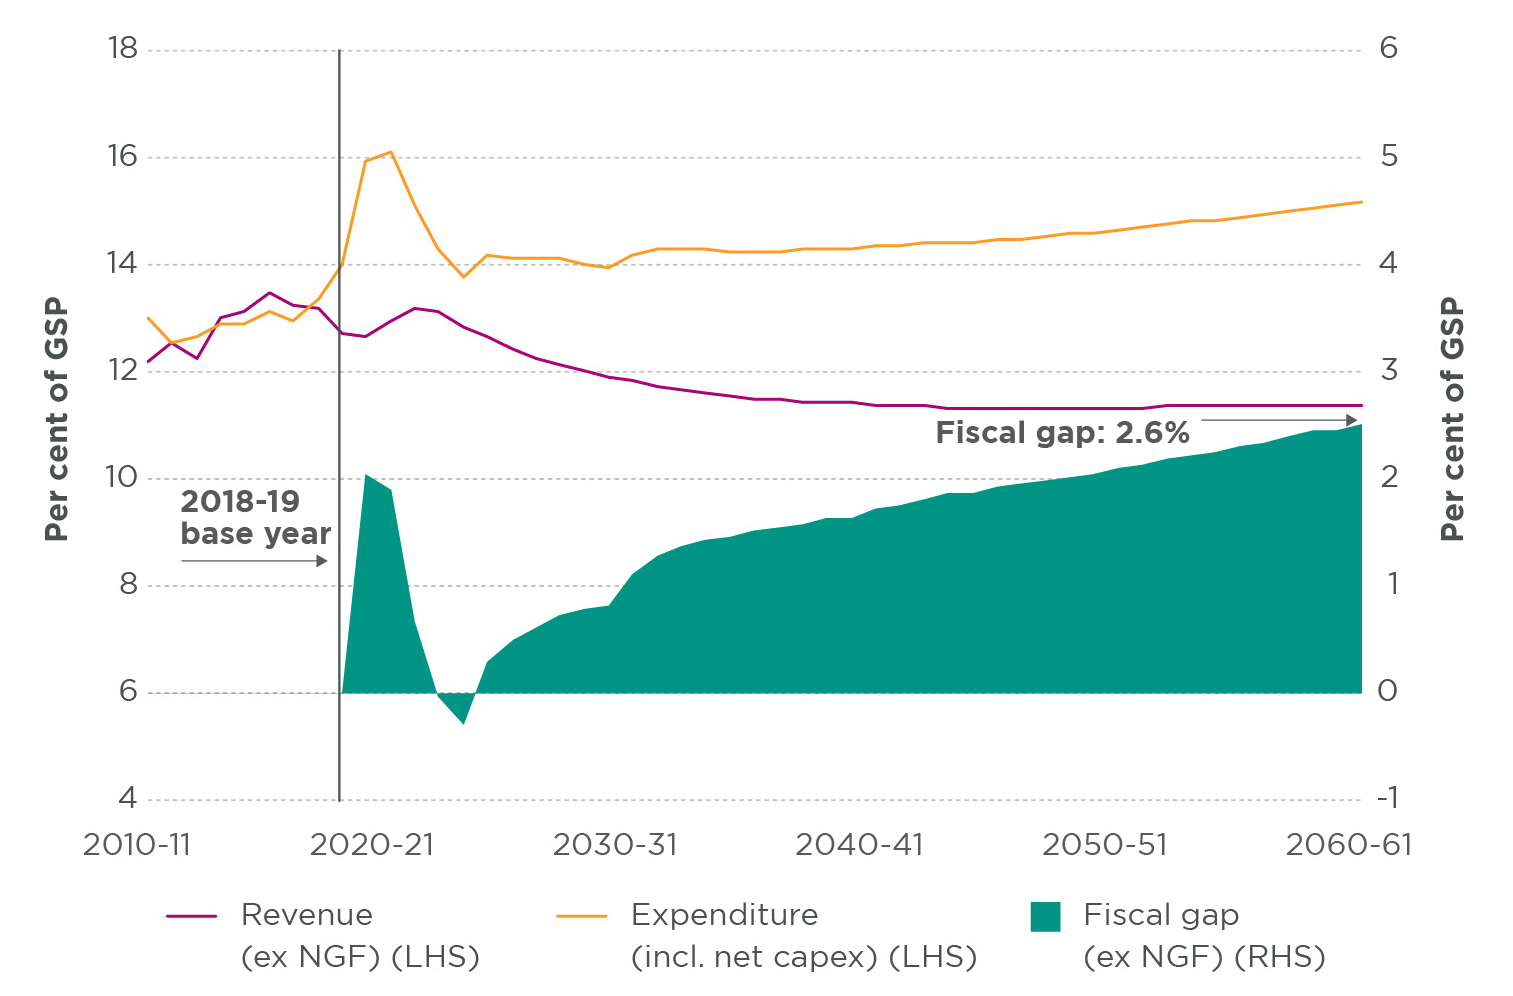 A mixed format chart, showing two line data sets representing Revenue (excluding NSW Generations Fund) and Expenditure (including net capex) above an area data set representing Fiscal gap (excluding NSW Generations Fund), across an x axis from 2010-11 to 2060-61 in 10 year increments. Expenditure line is trending up slightly, Revenue line is trending down slightly, while fiscal gap grows sharply in 2020-21, drops into negative around 2025-26 and then grows steadily until 2060-61. 